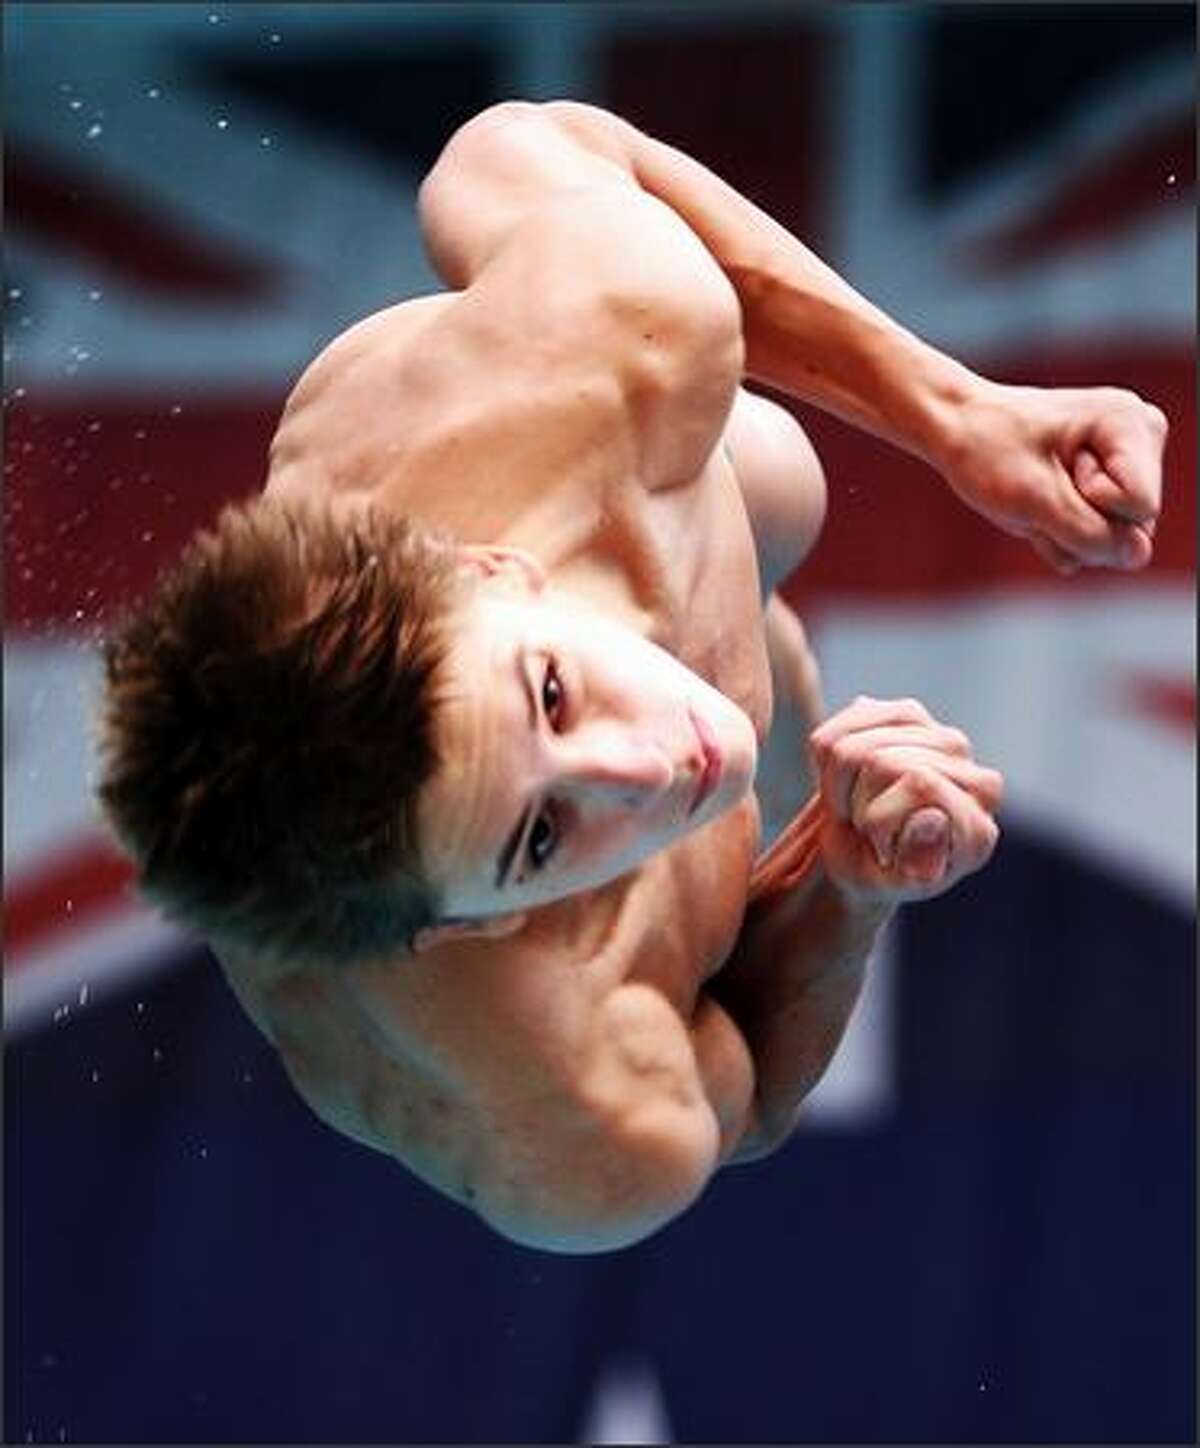 Luke Hayes of Victoria competes in the final of the mens 1m during day one of the 2008 Australian Diving Championships at North Adelaide Aquatic Centre in Adelaide, Australia. Photo by Simon Cross/Getty Images